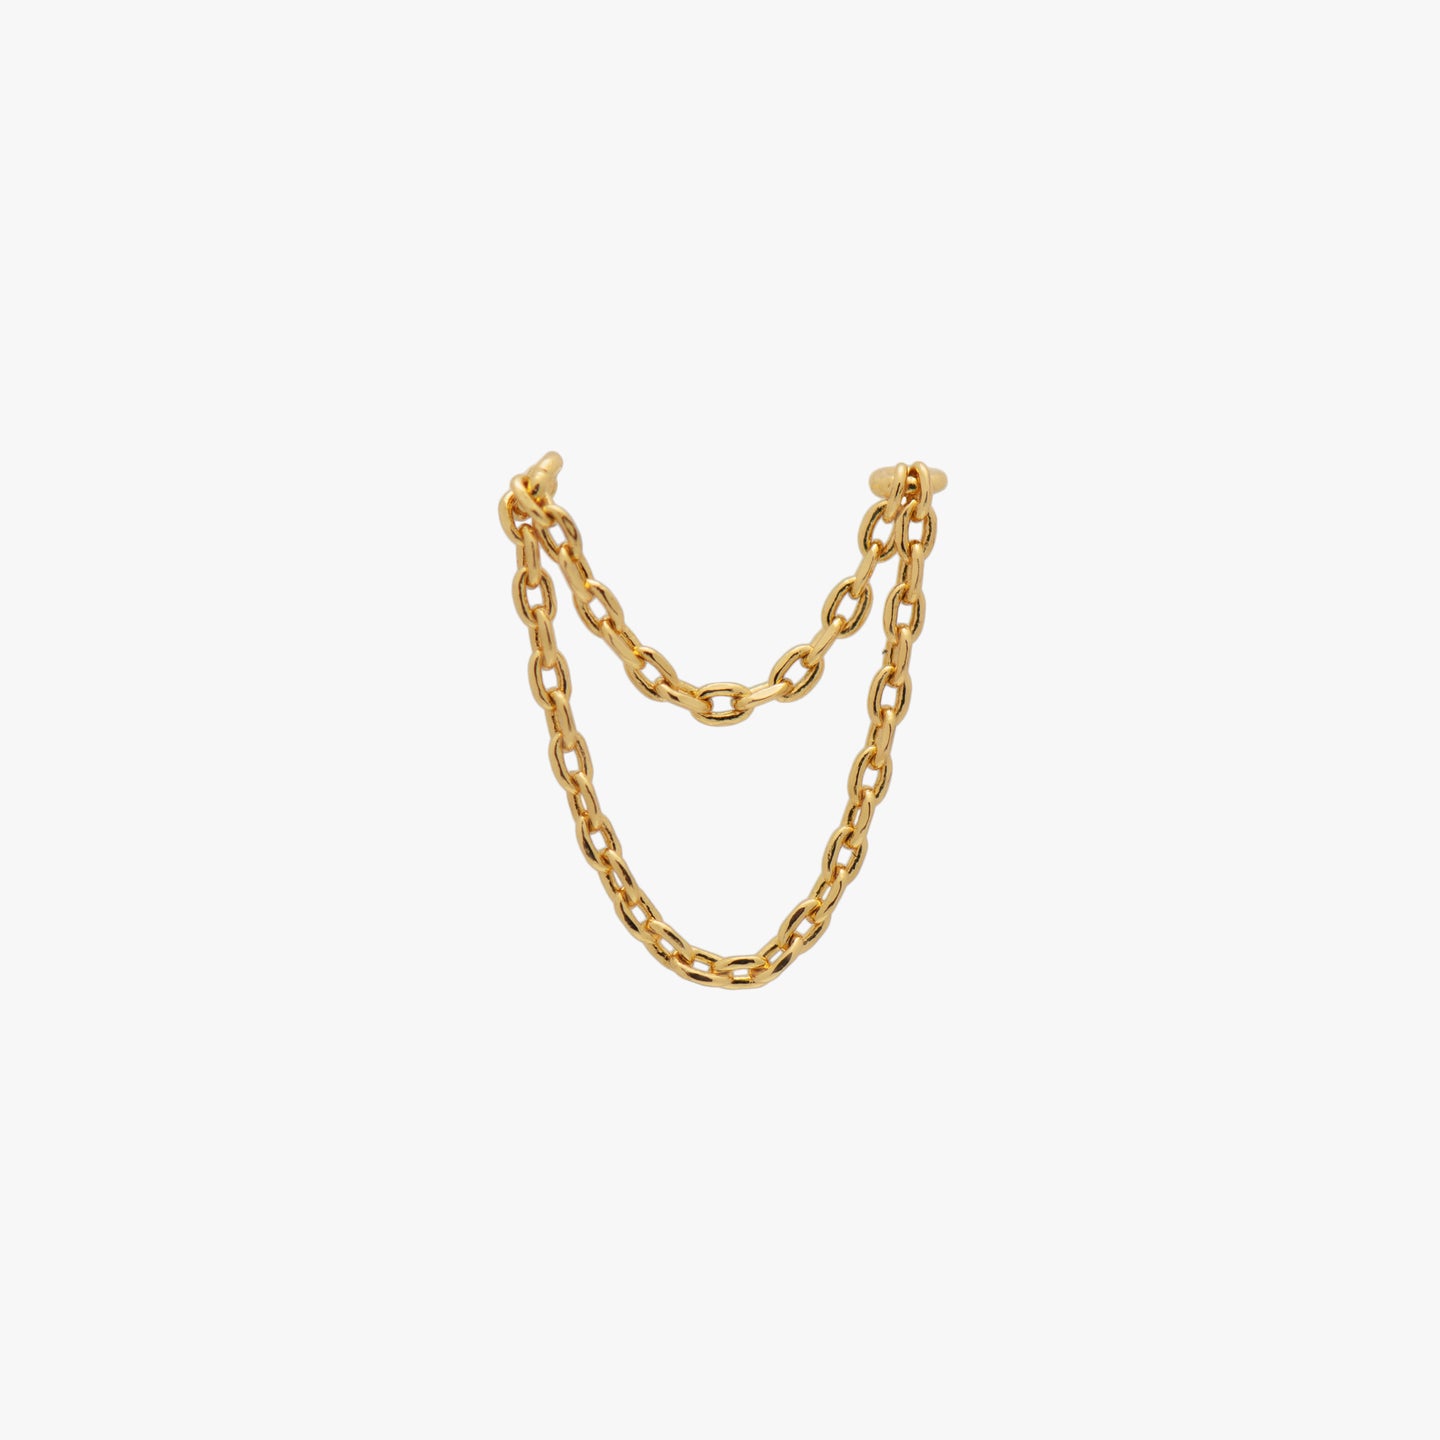 A gold double chain connector earring. color:null|gold